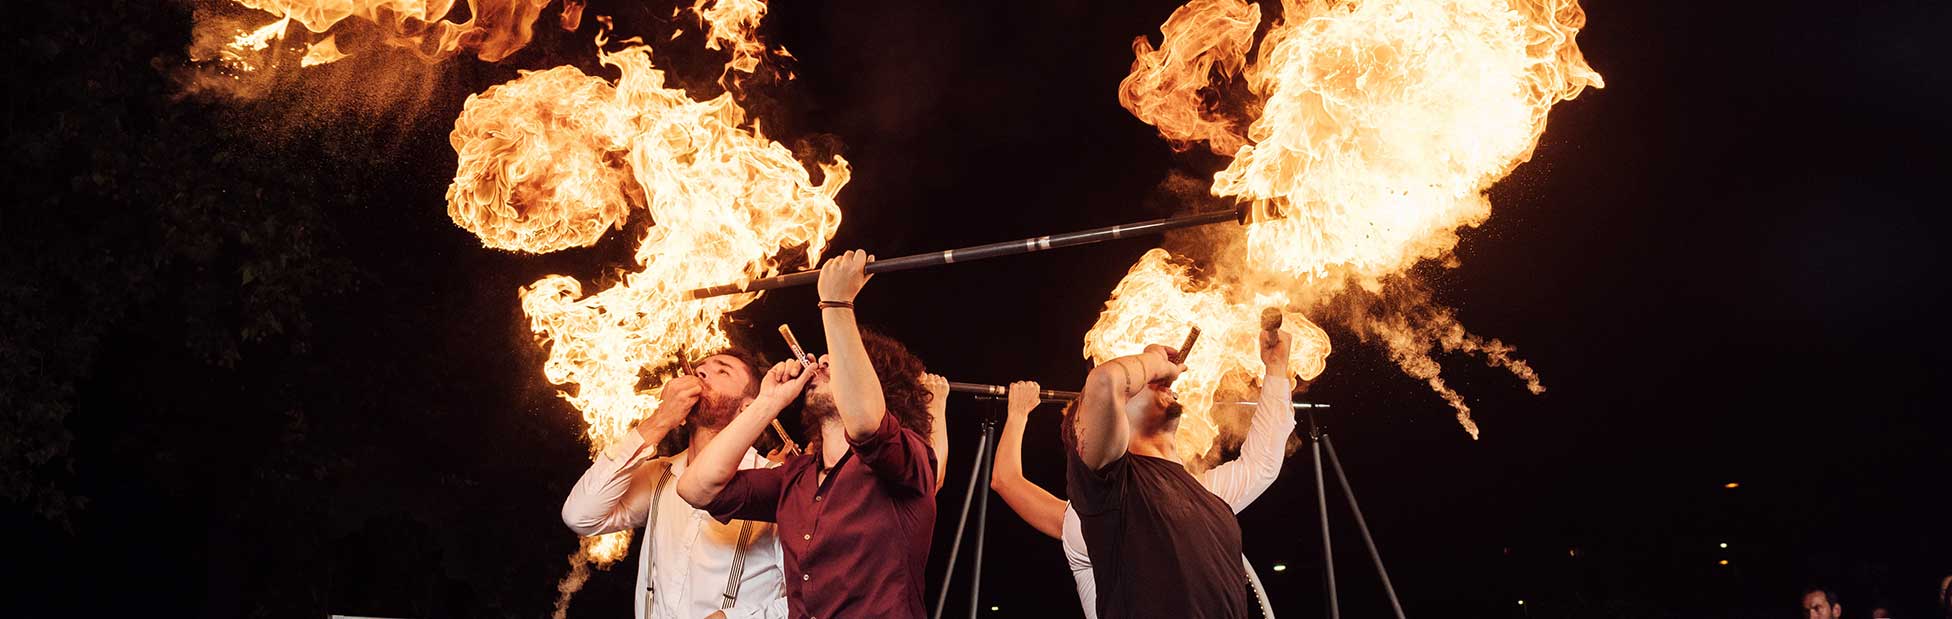 Men playing instruments with fire behind them 